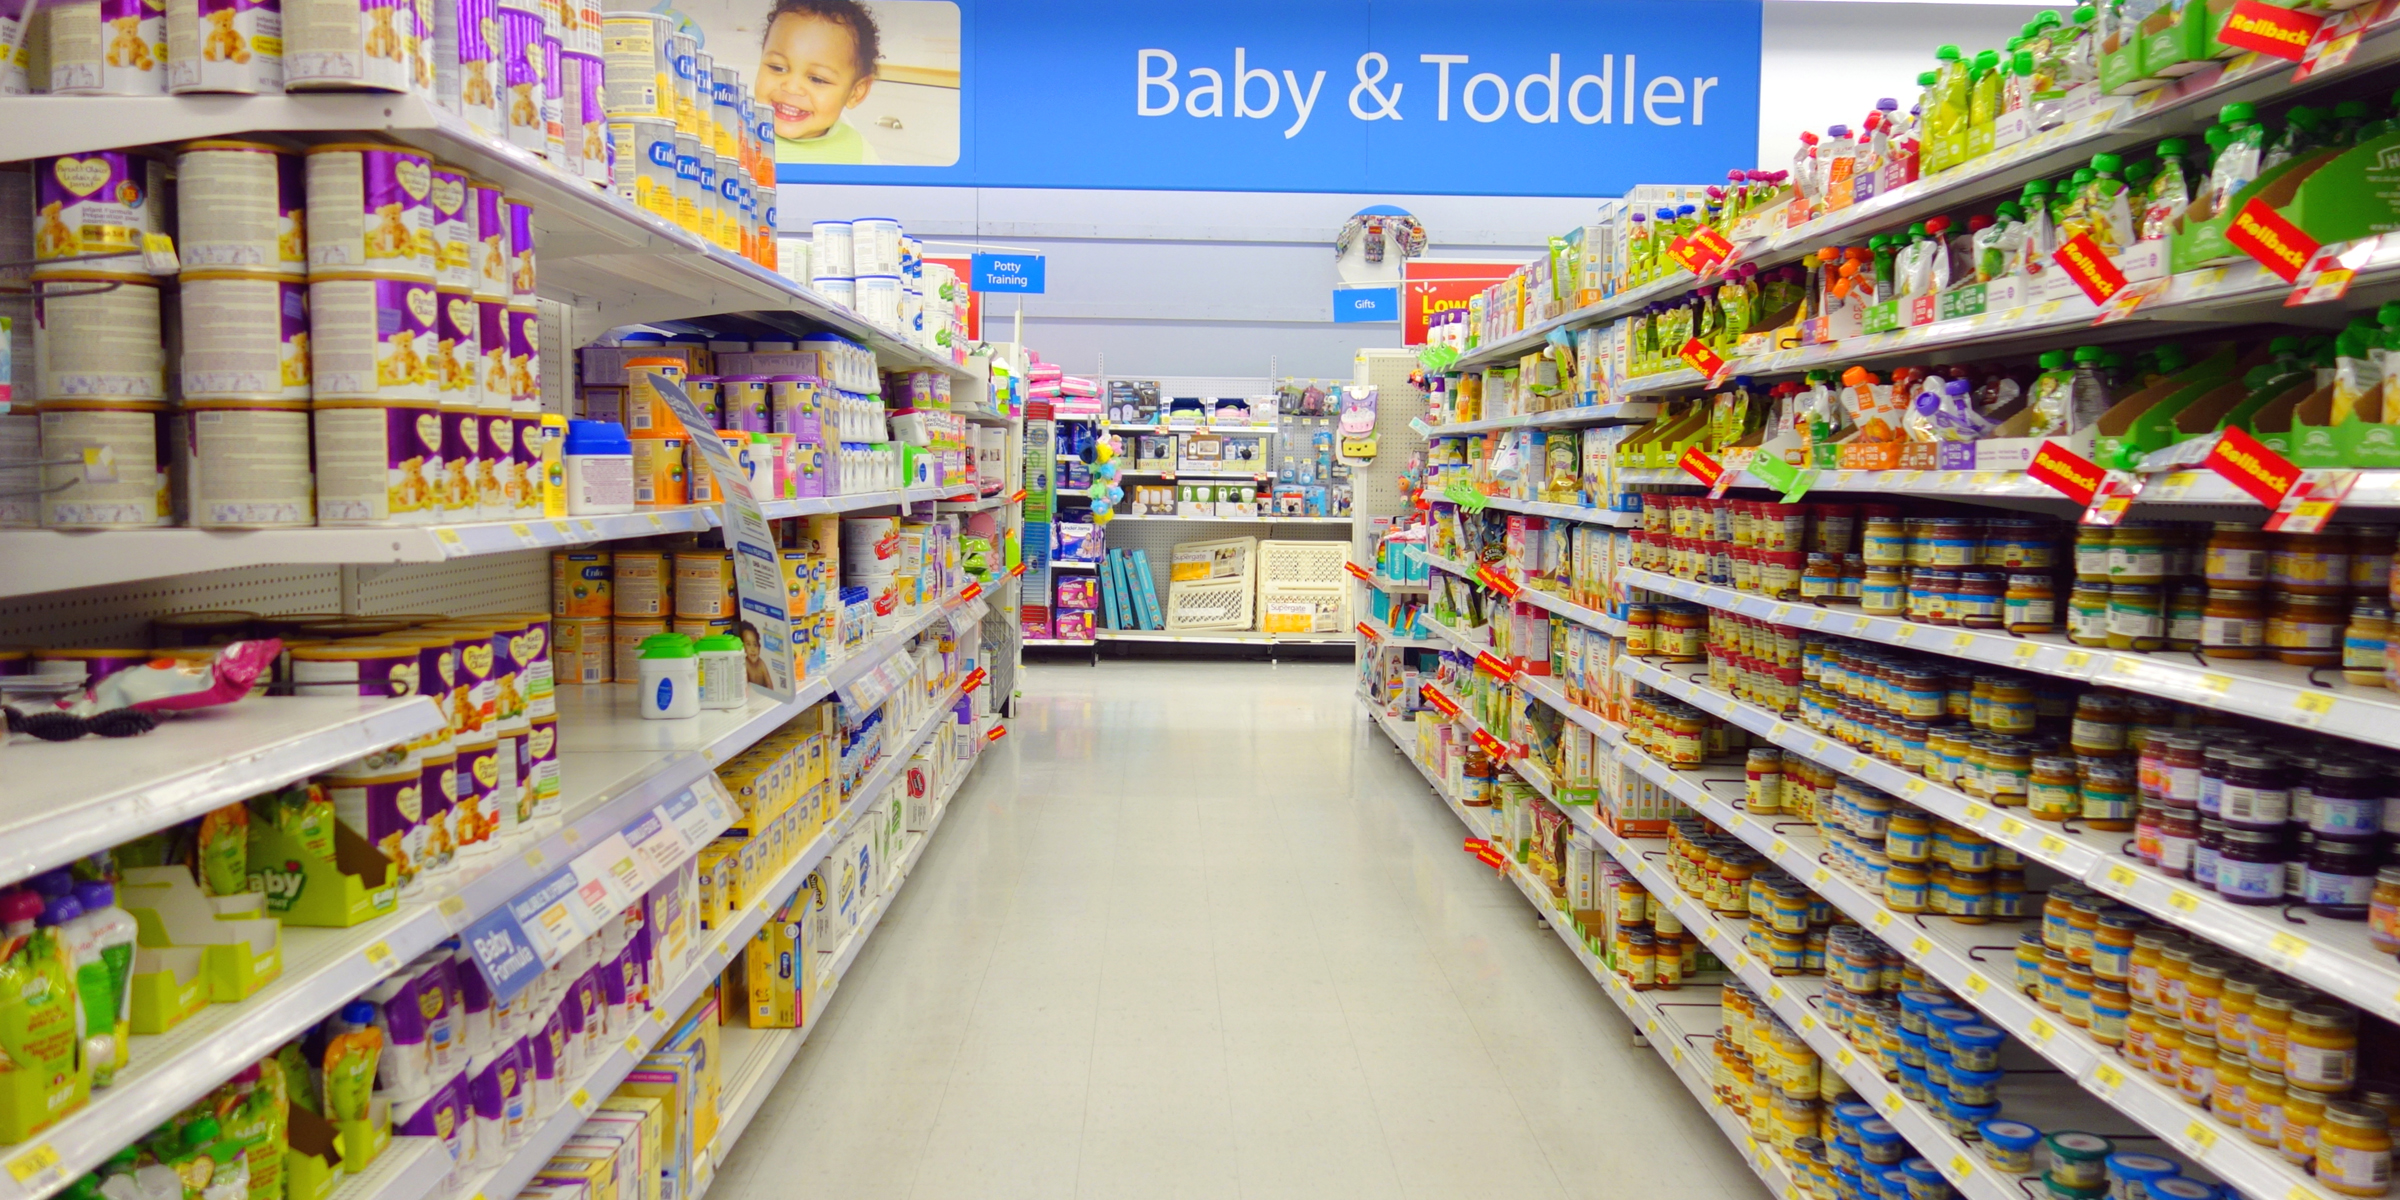 An aisle in a grocery store | Source: Shutterstock